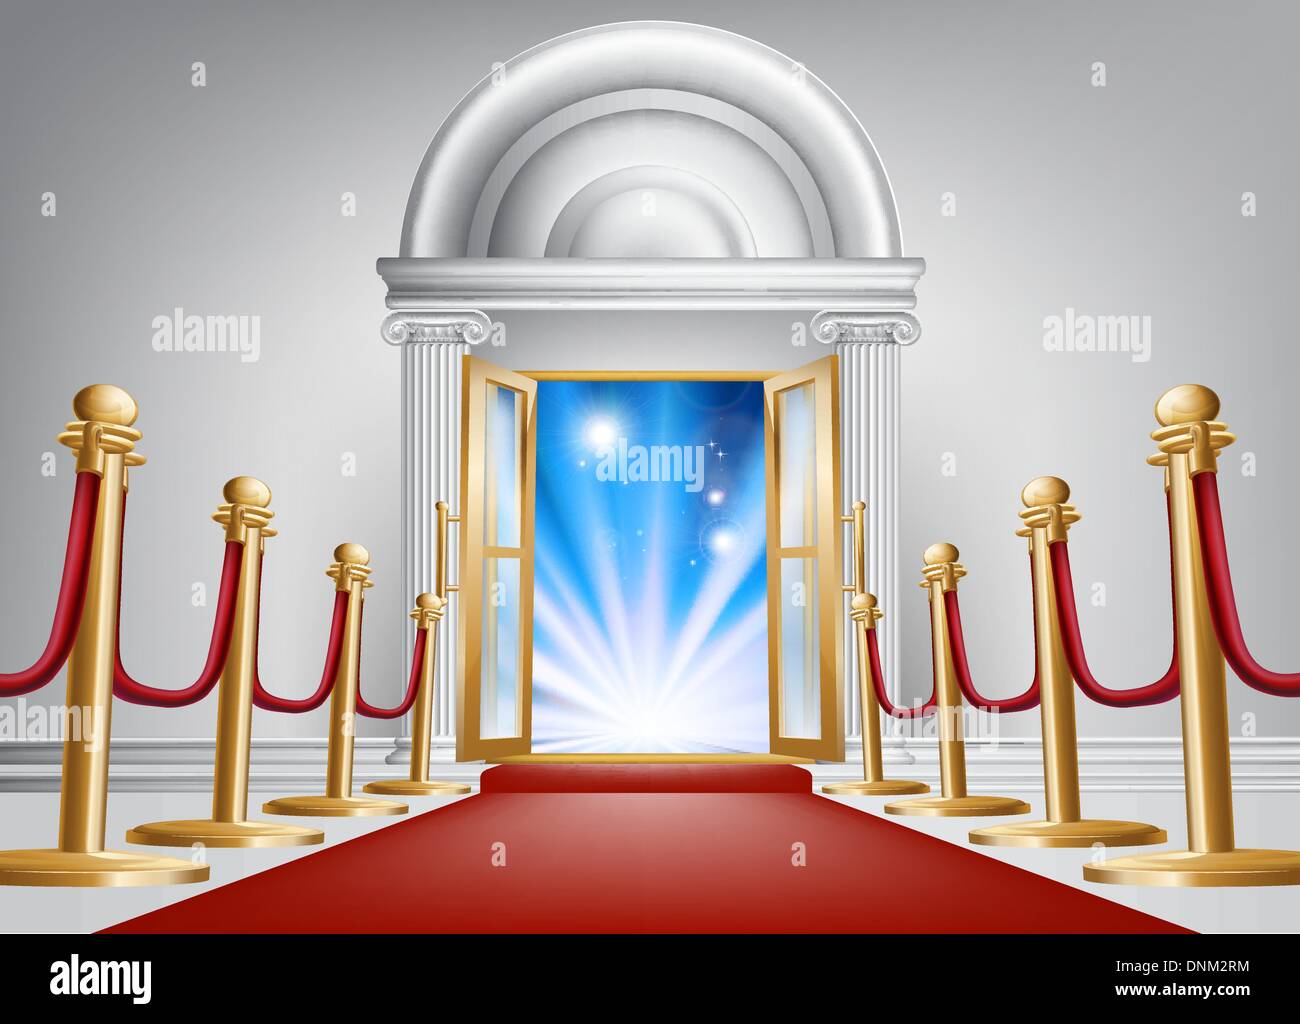 A red carpet entrance with velvet rope and imposing marble doorway leading into an exciting venue Stock Vector